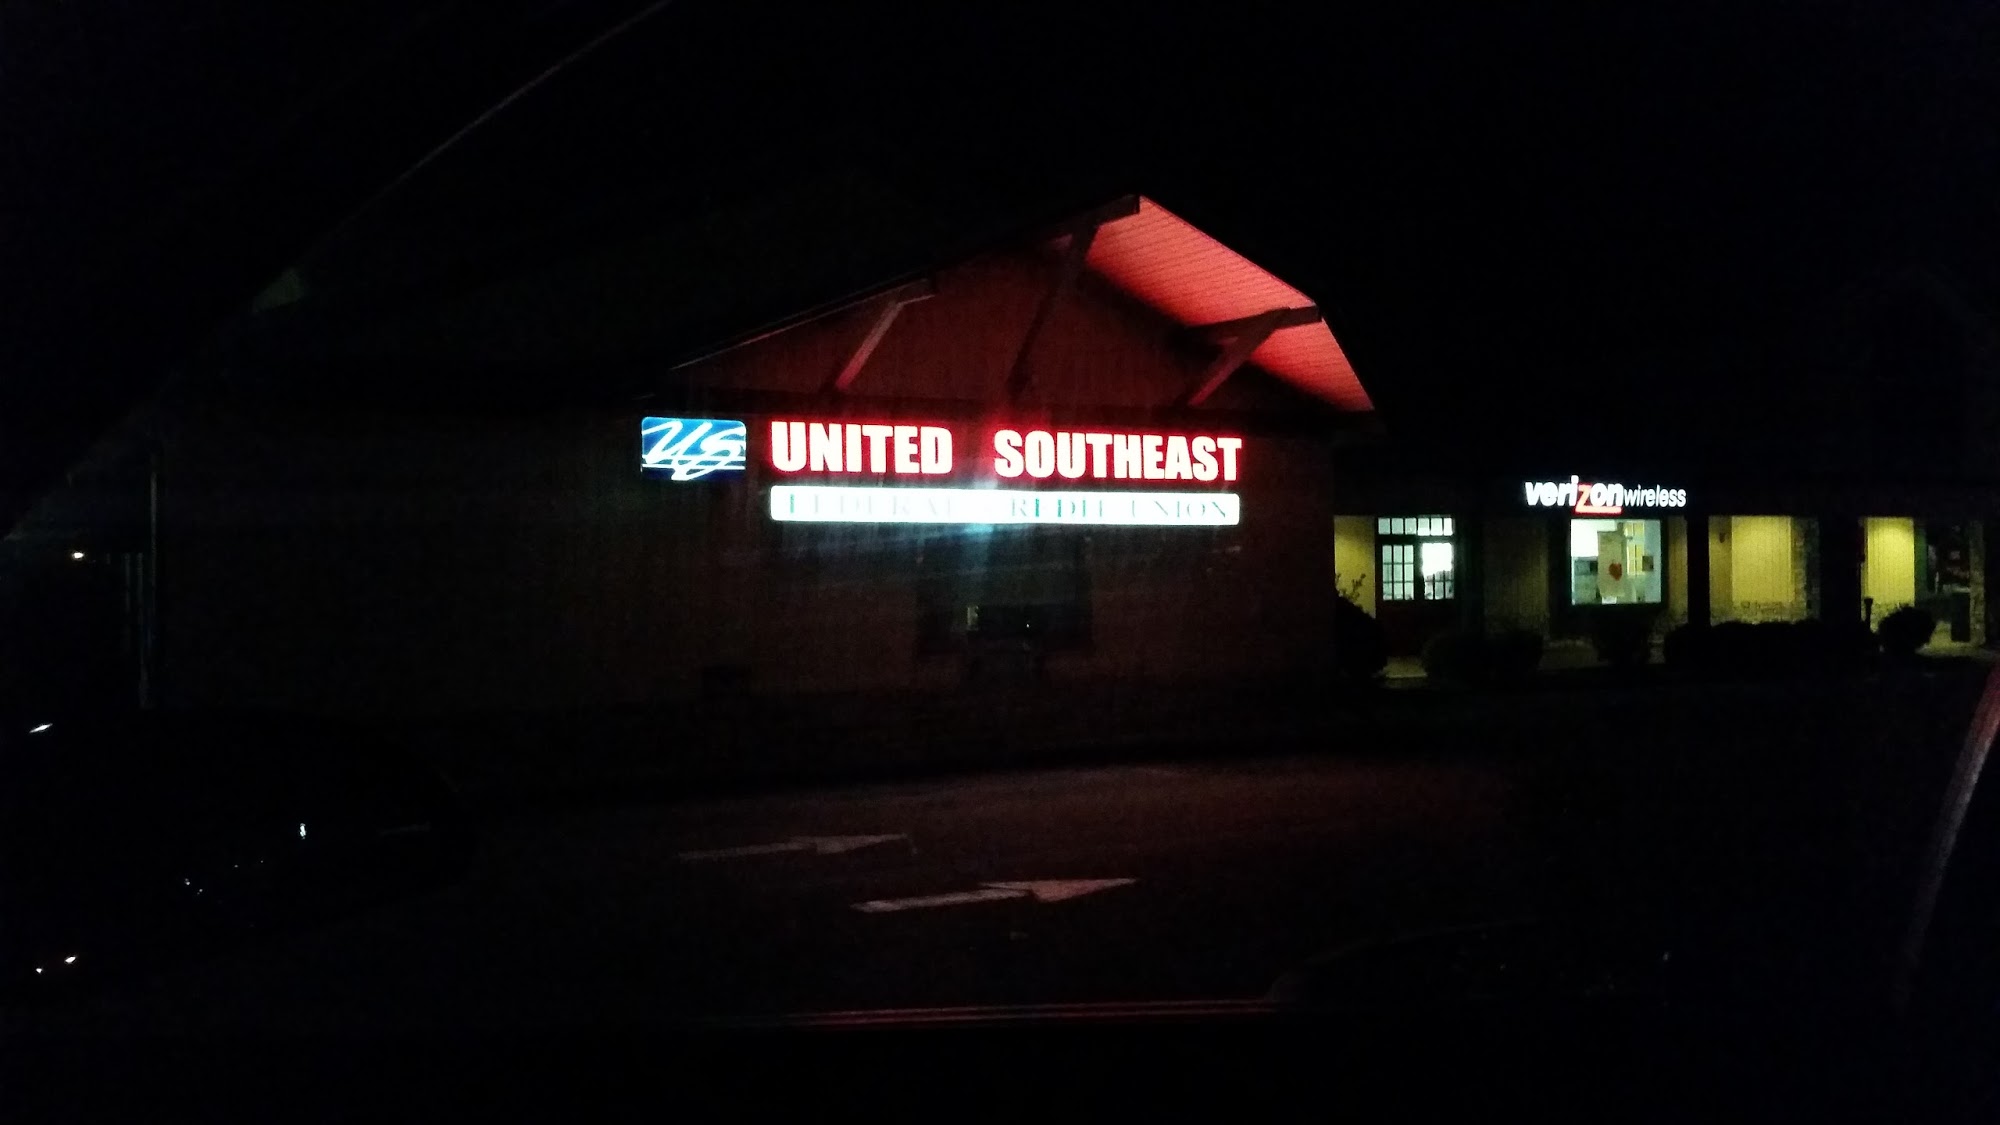 United Southeast Federal Credit Union